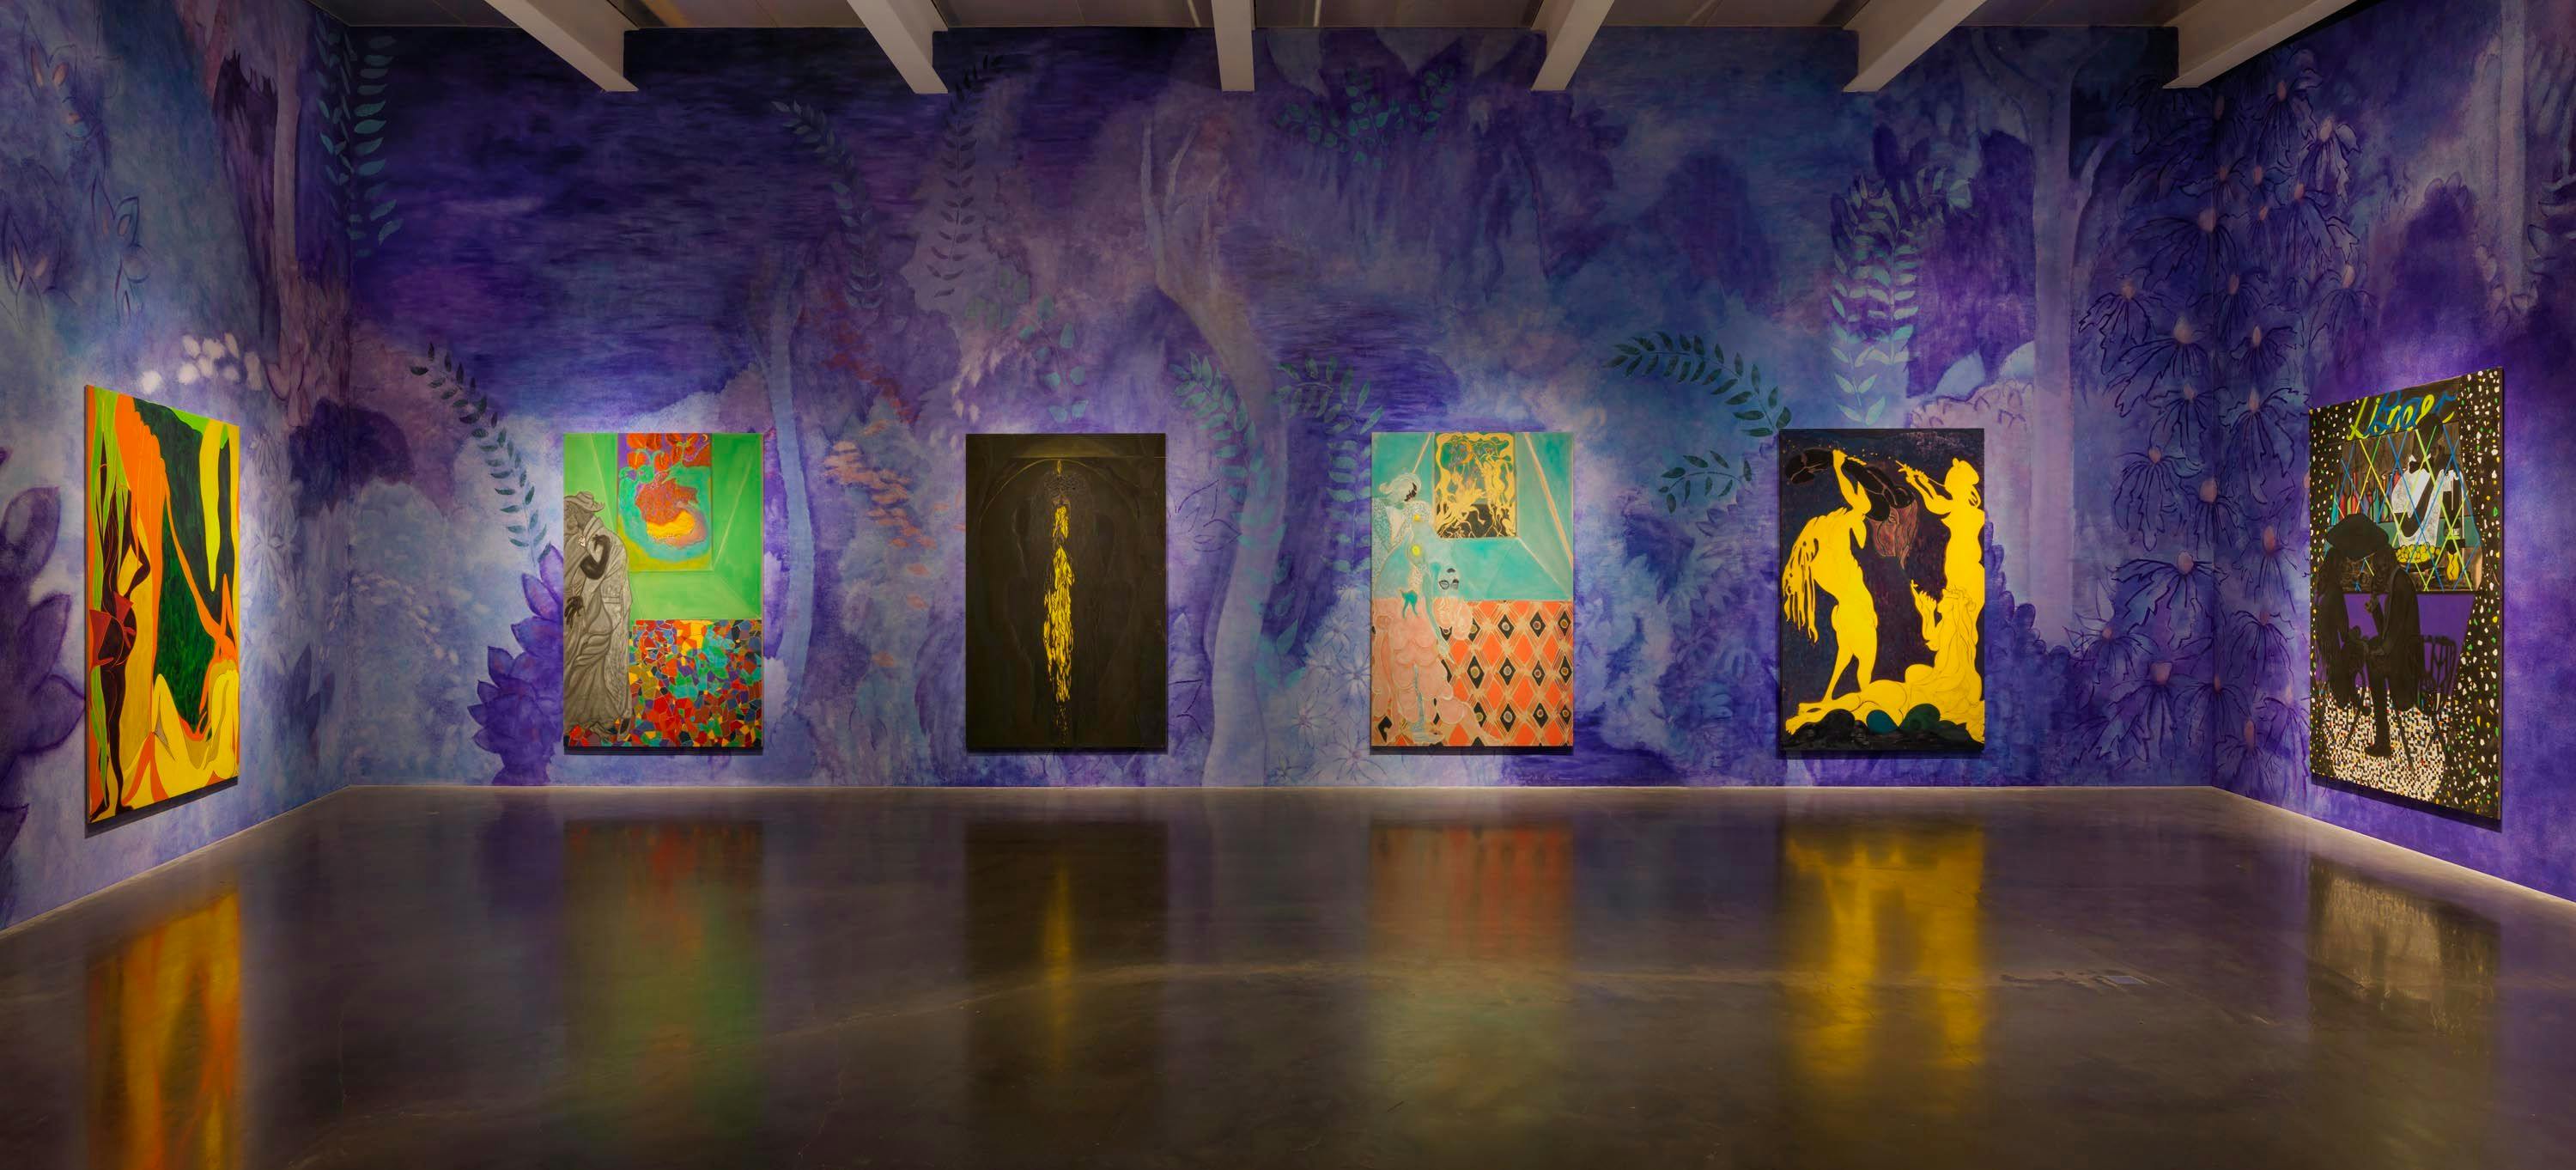 Installation view of the exhibition, Chris Ofili: Night and Day, at New Museum in New York, dated 2014.